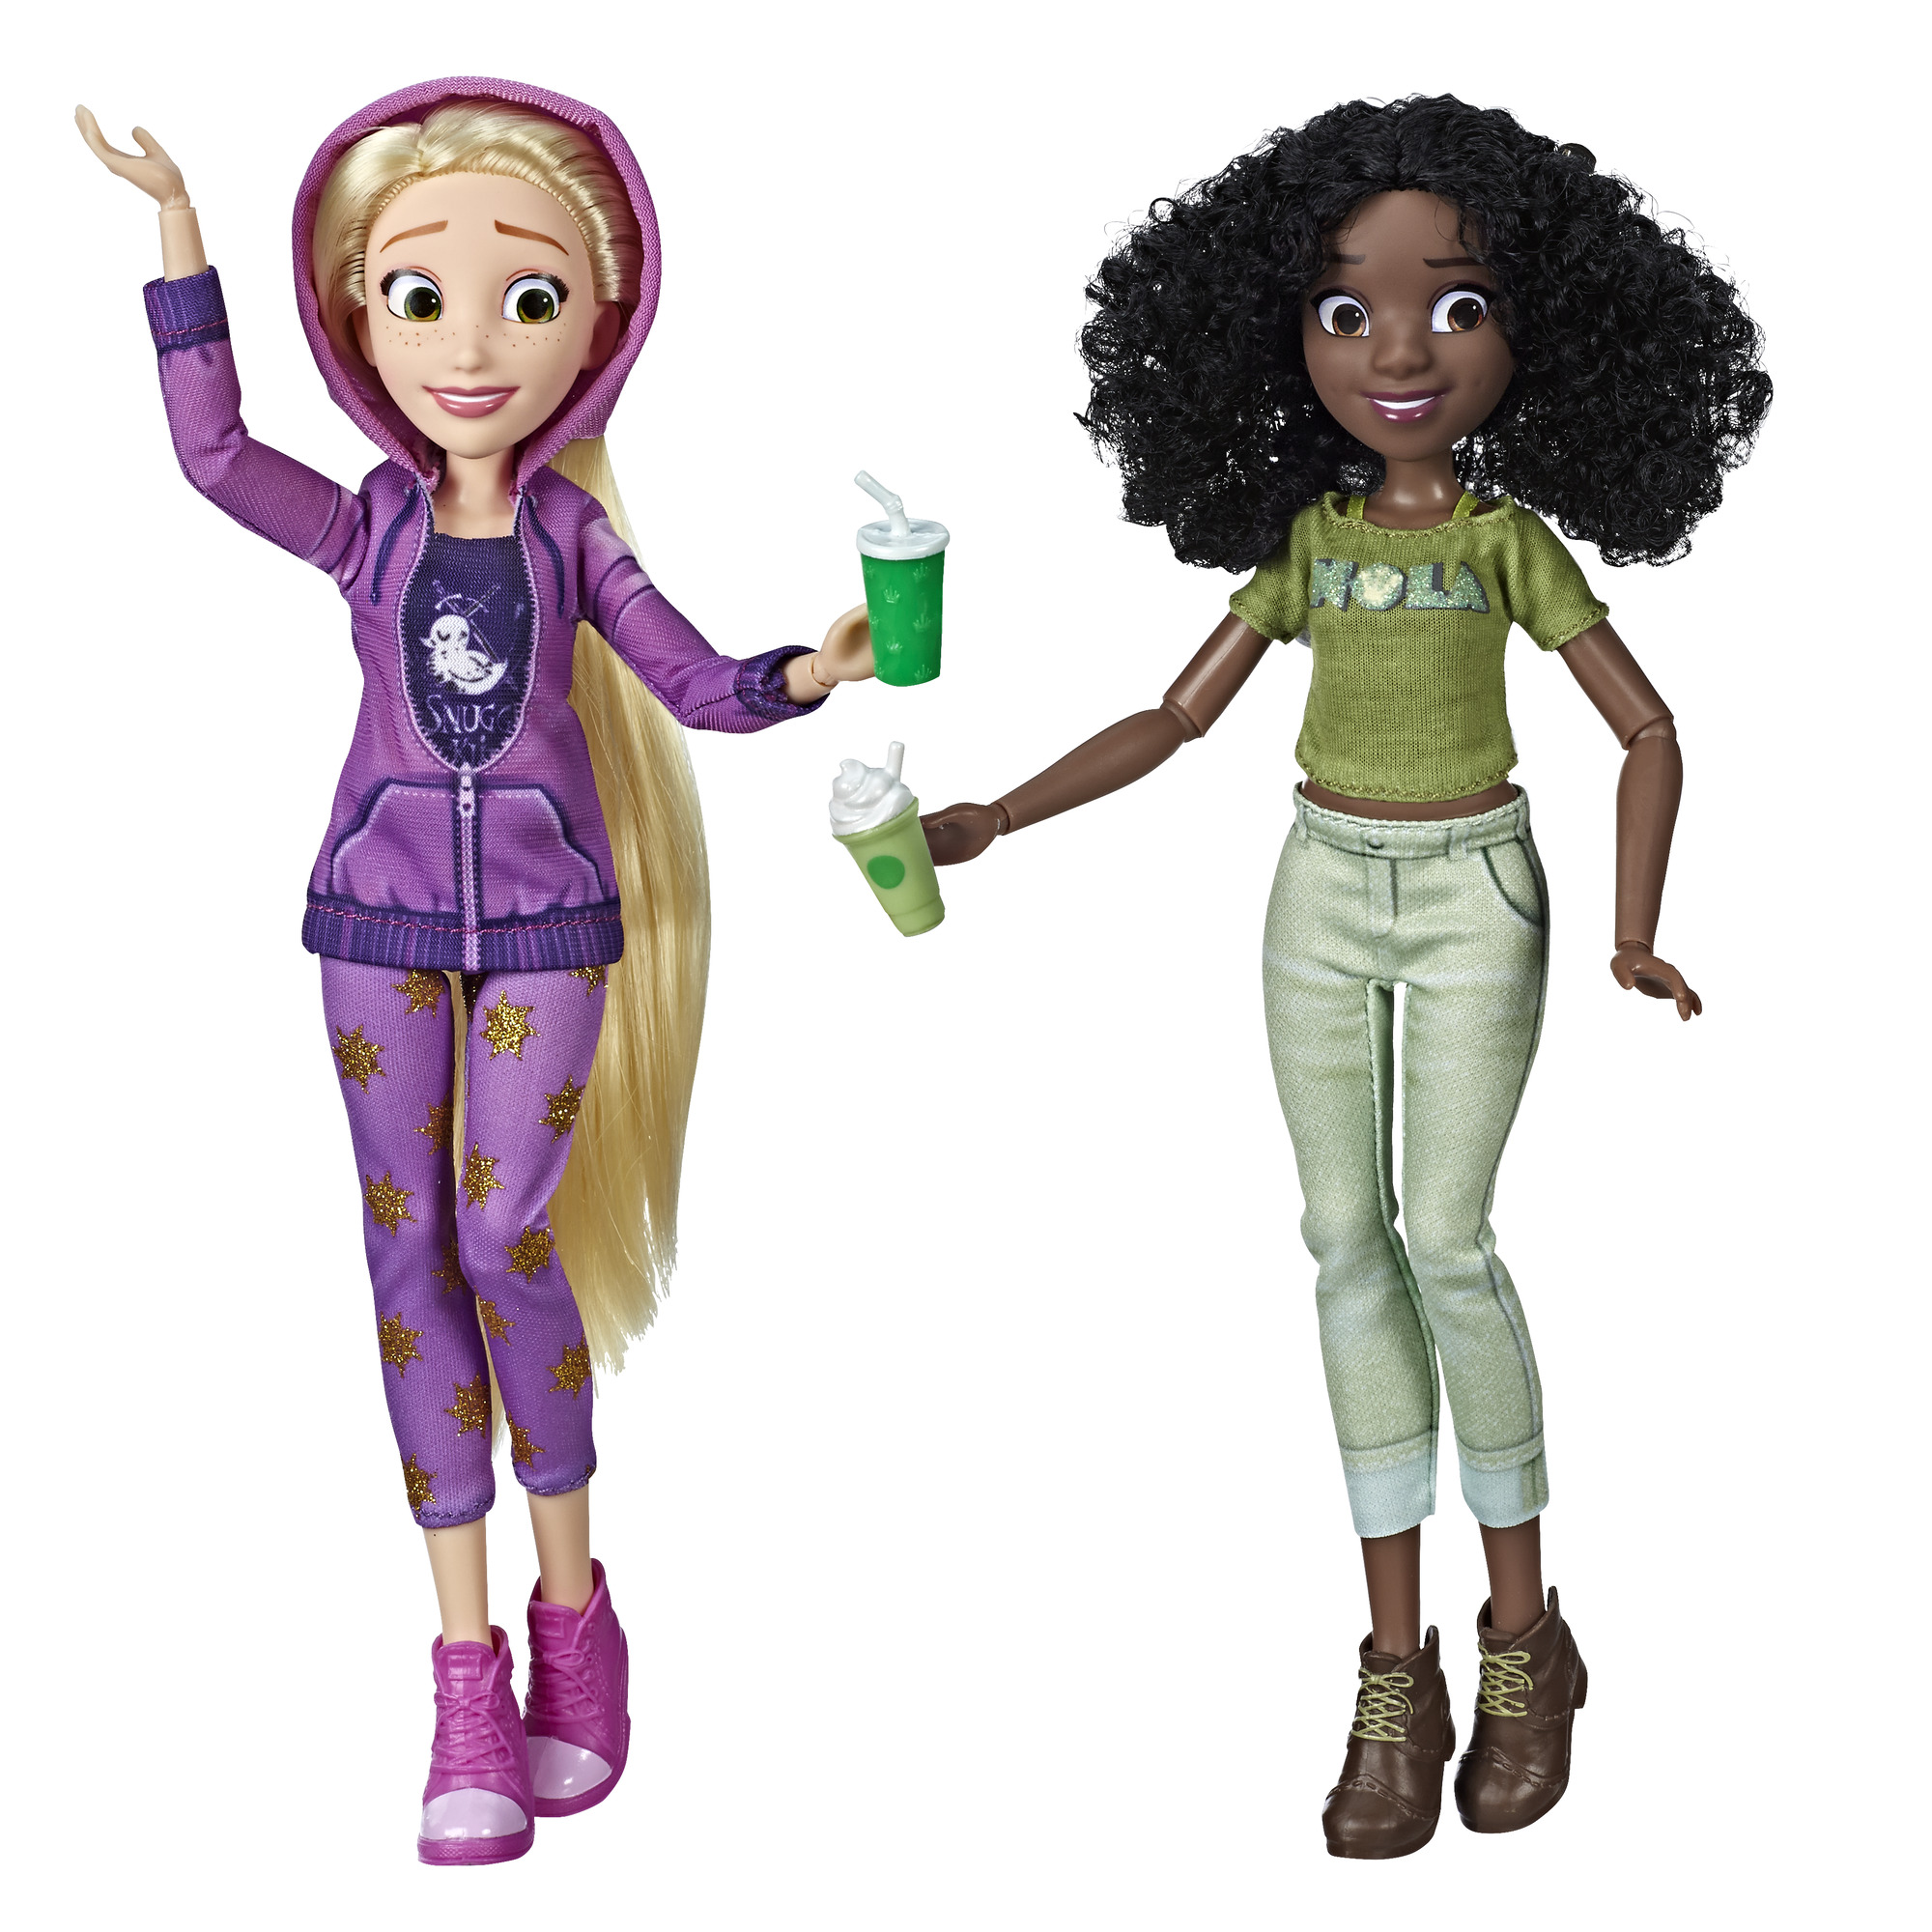 Verbinding verbannen piloot Disney Princess Ralph Breaks the Internet Movie Dolls, Rapunzel and Tiana  Dolls with Comfy Clothes and Accessories